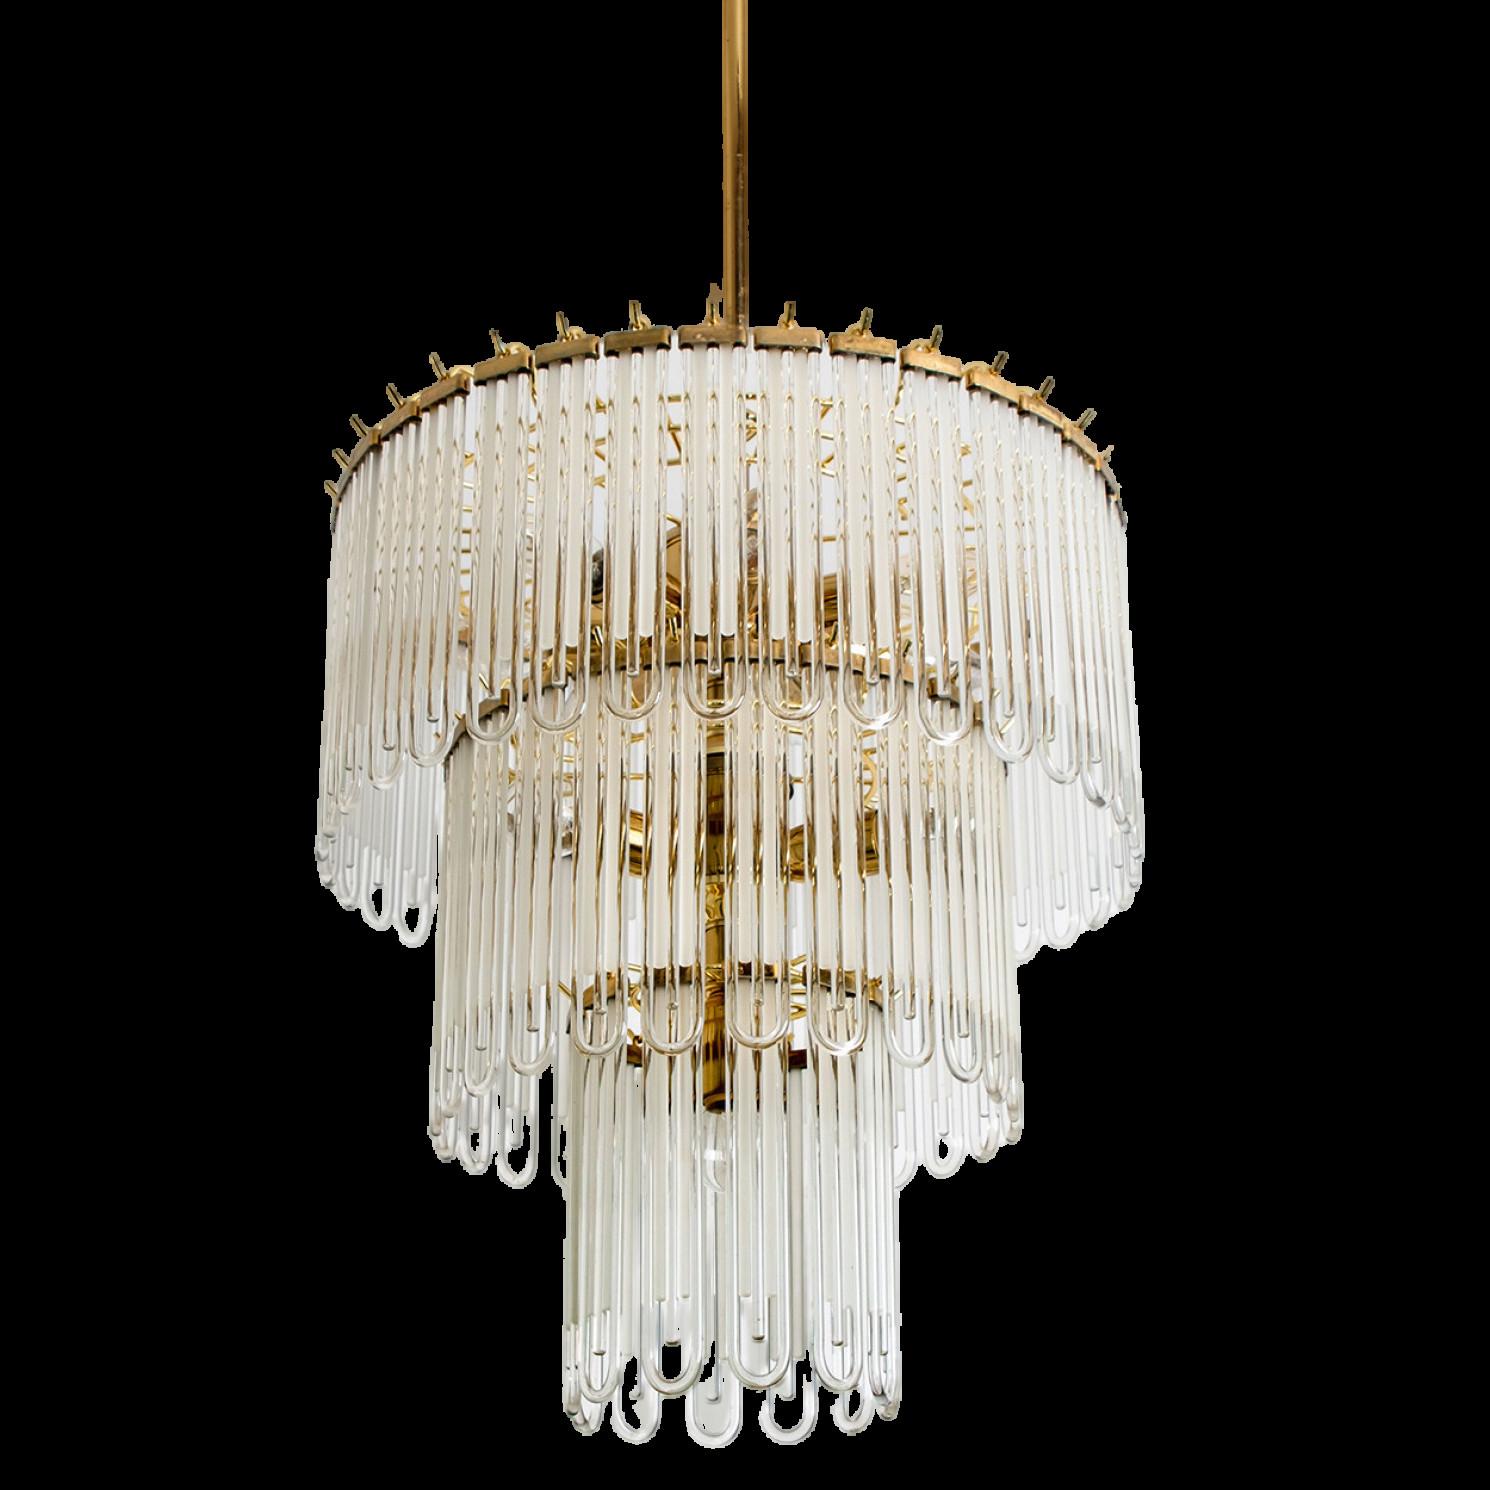 Clean lines to complement all decors. Wonderful high-end light fixture by Sciolari. With brass detail hanging glass giving the piece an elegant appearance which refracts the light, filling a room with a soft, warm glow

The chandelier has brass